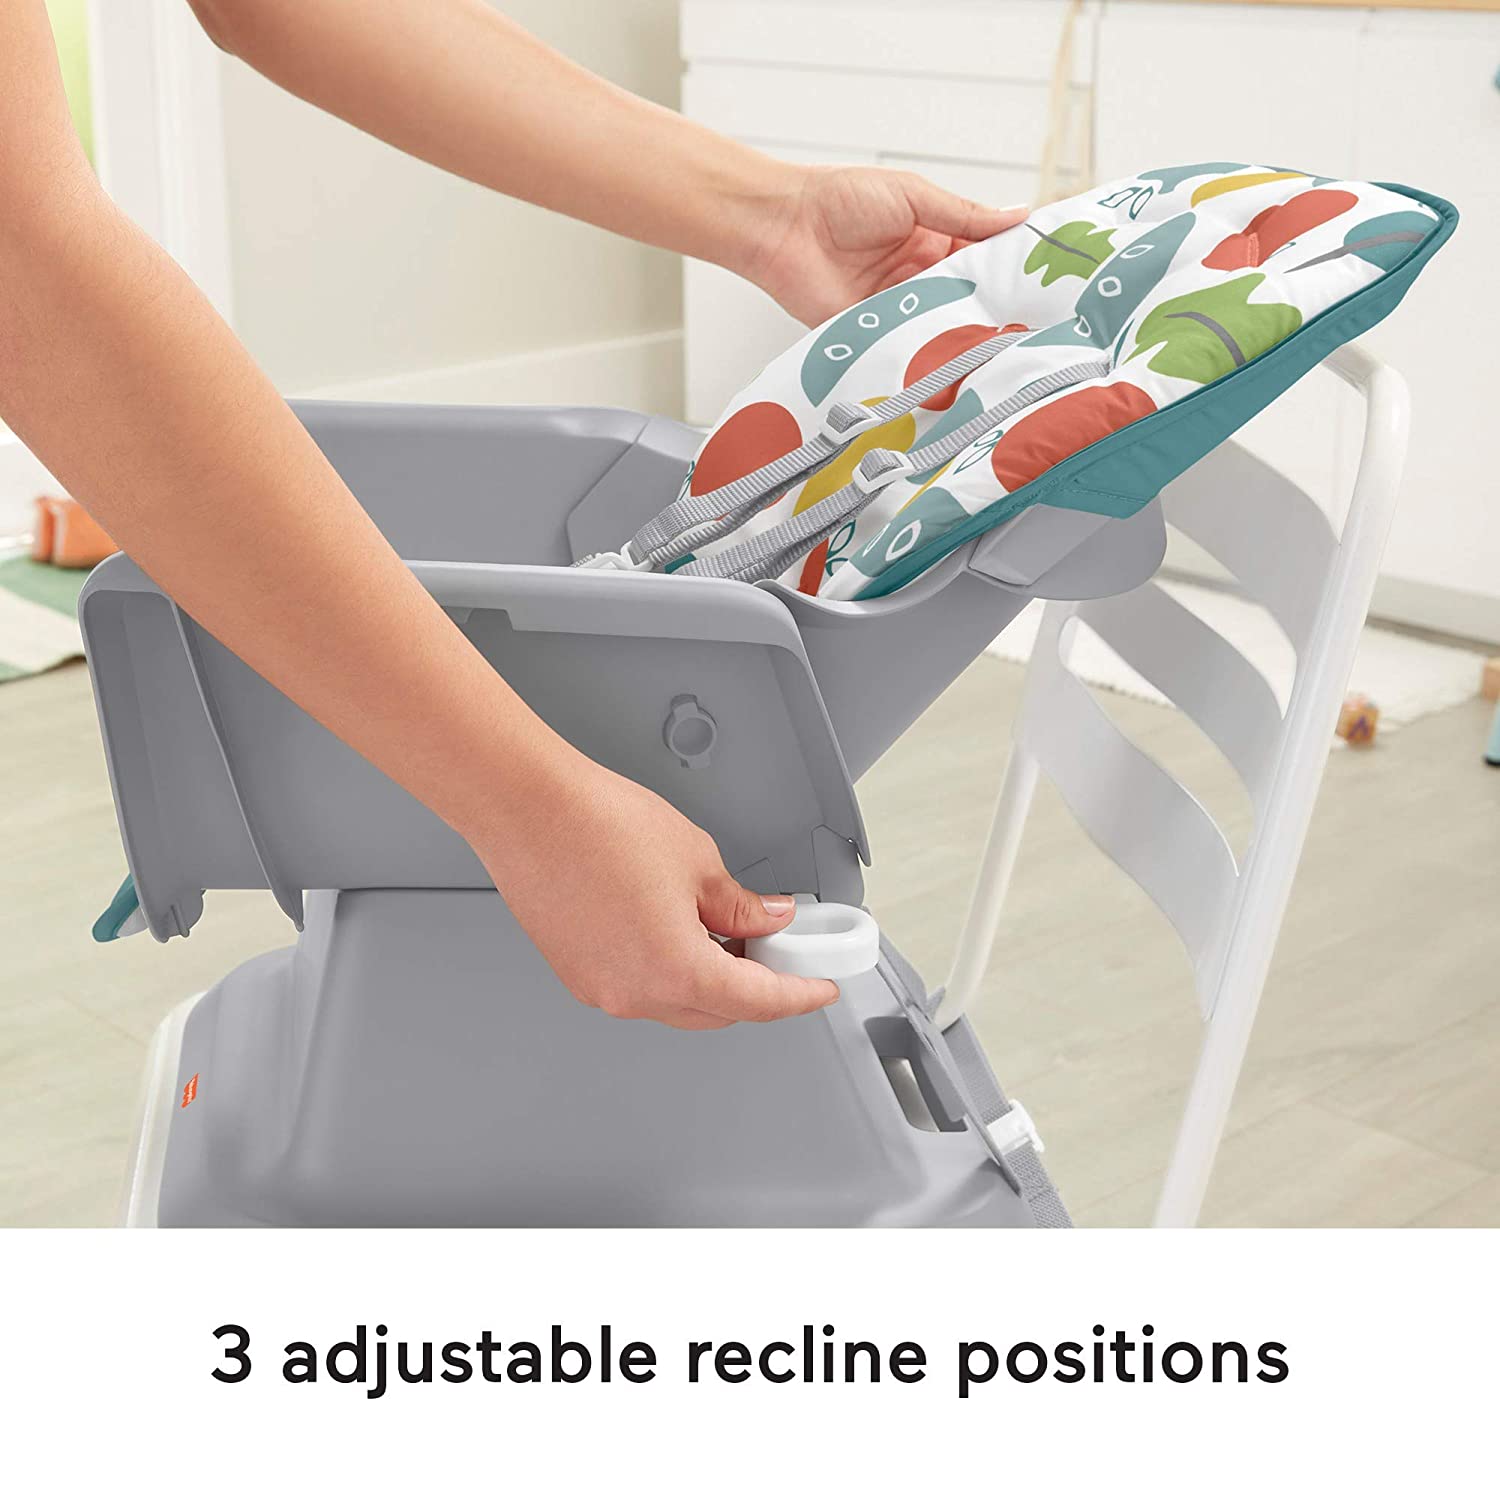 Fisher-Price SpaceSaver Simple Clean High Chair, Pearfection - Portable for Baby-to-Toddler Dining Chair